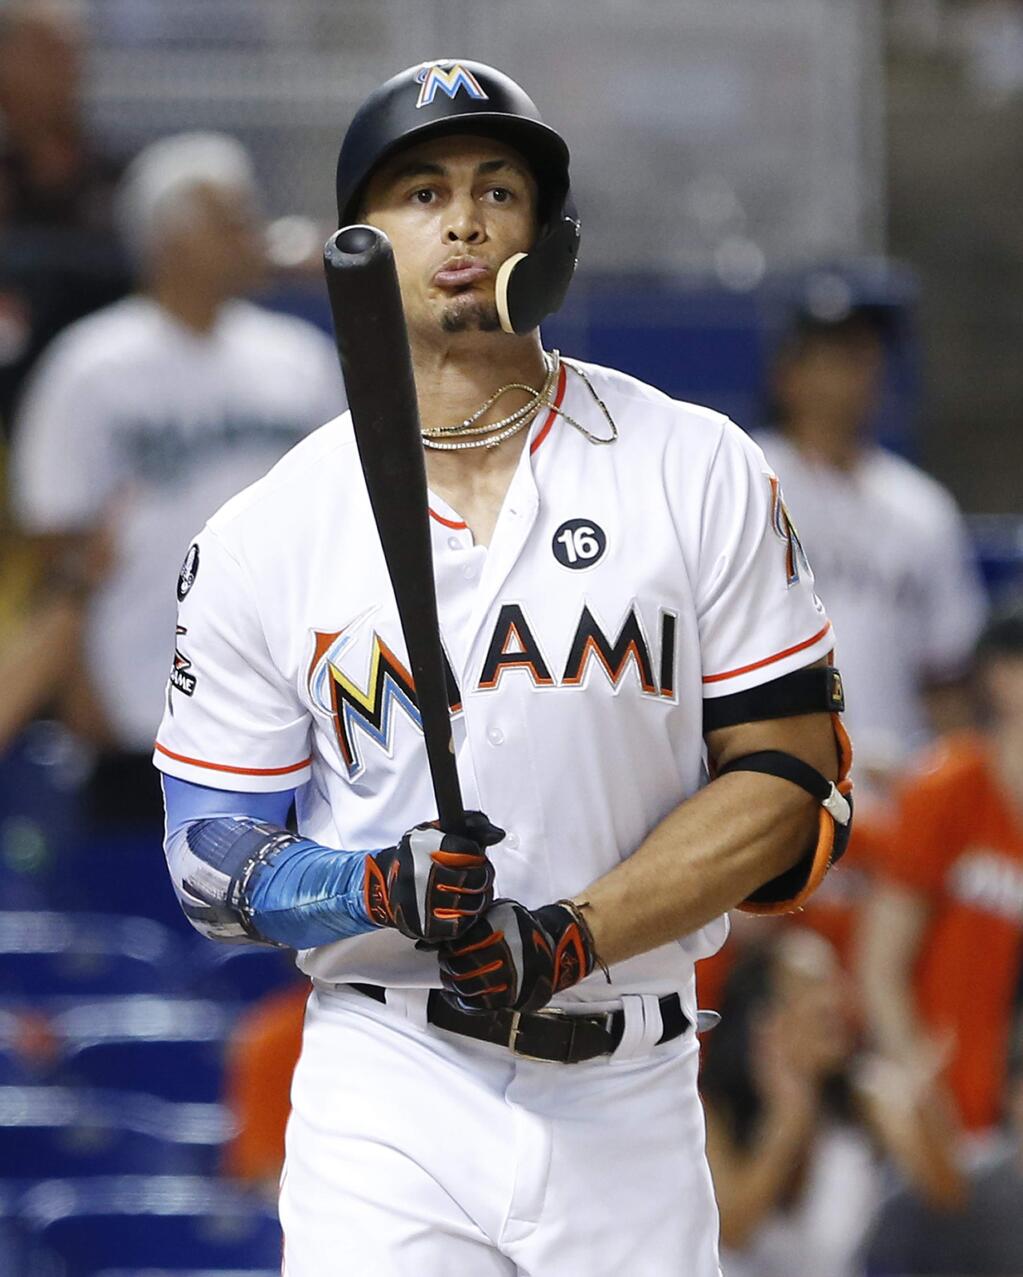 In this Thursday, Aug. 31, 2017 file photo, Miami Marlins' Giancarlo Stanton reacts after he flies out during the ninth inning of a baseball game against the Philadelphia Phillies in Miami. Giants general manager Bobby Evans confirmed on San Francisco‚Äôs flagship radio station KNBR that the club has reached the parameters of a trade for Miami slugger Giancarlo Stanton. Evans spoke Wednesday, Dec. 6, 2017 of the Giants‚Äô pursuit of the Marlins star. (AP Photo/Wilfredo Lee, File)